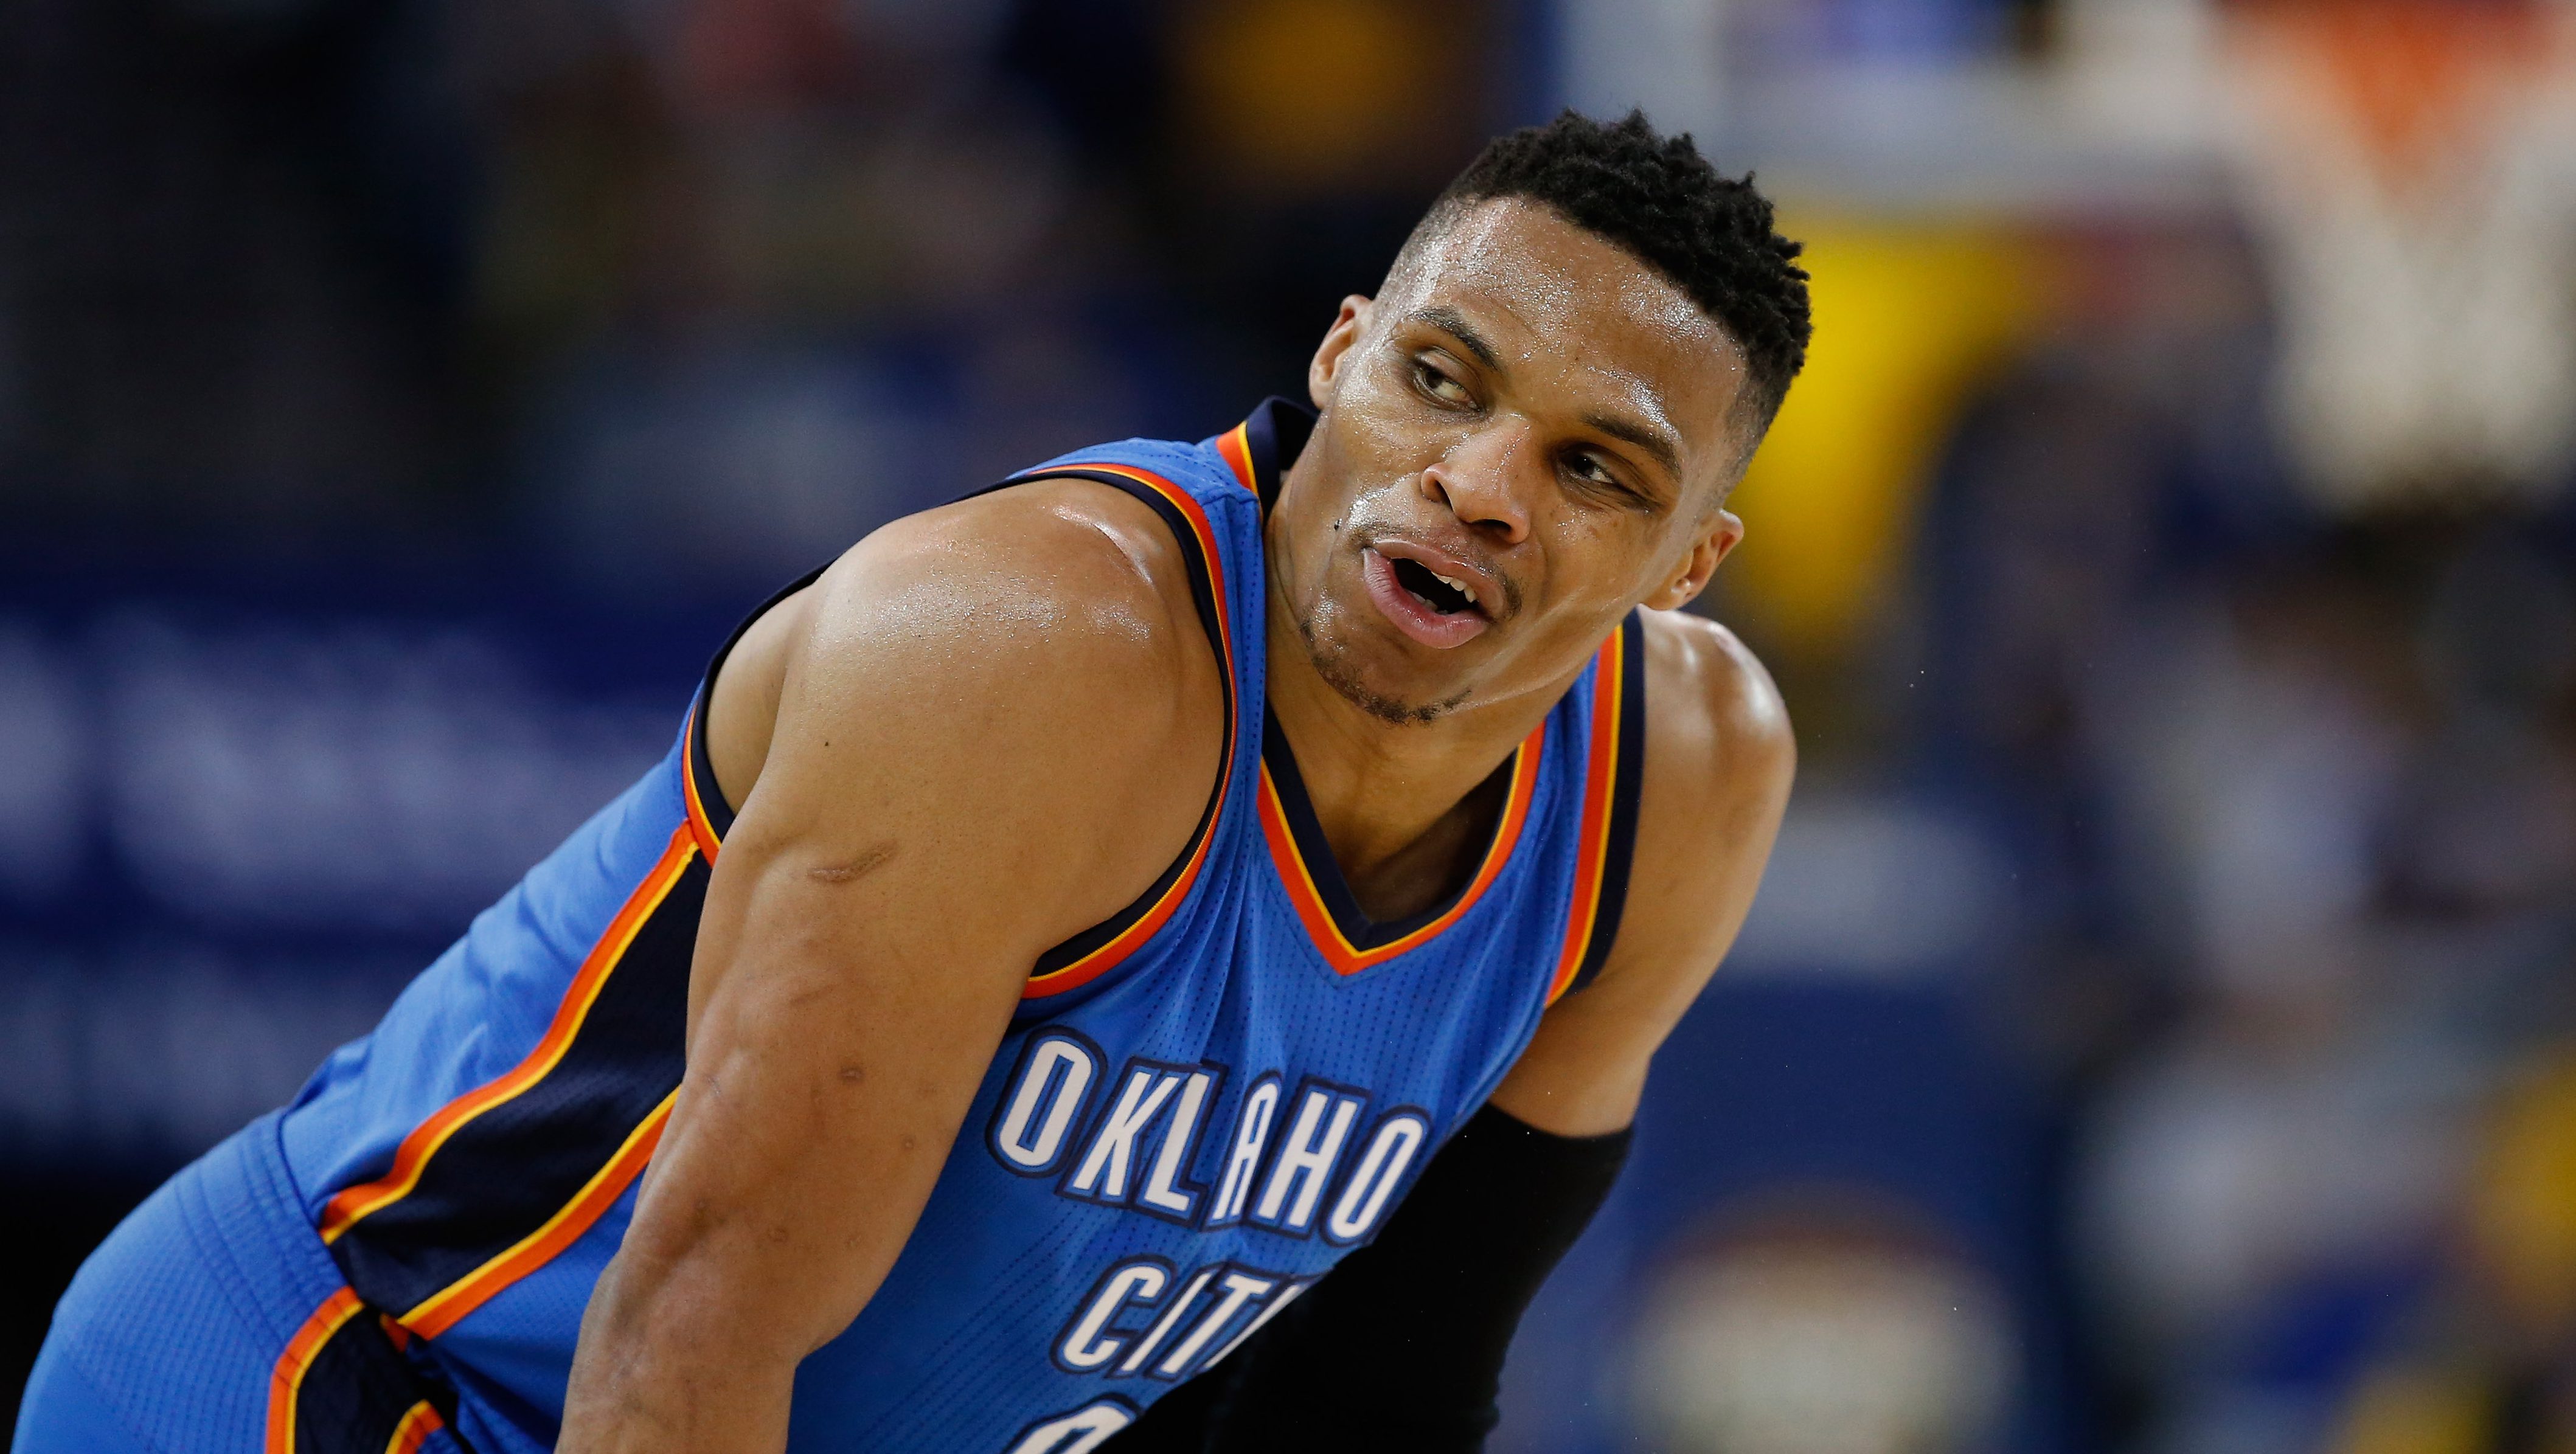 Russell Westbrook Stats in Game 5 NBA Playoffs vs. Spurs